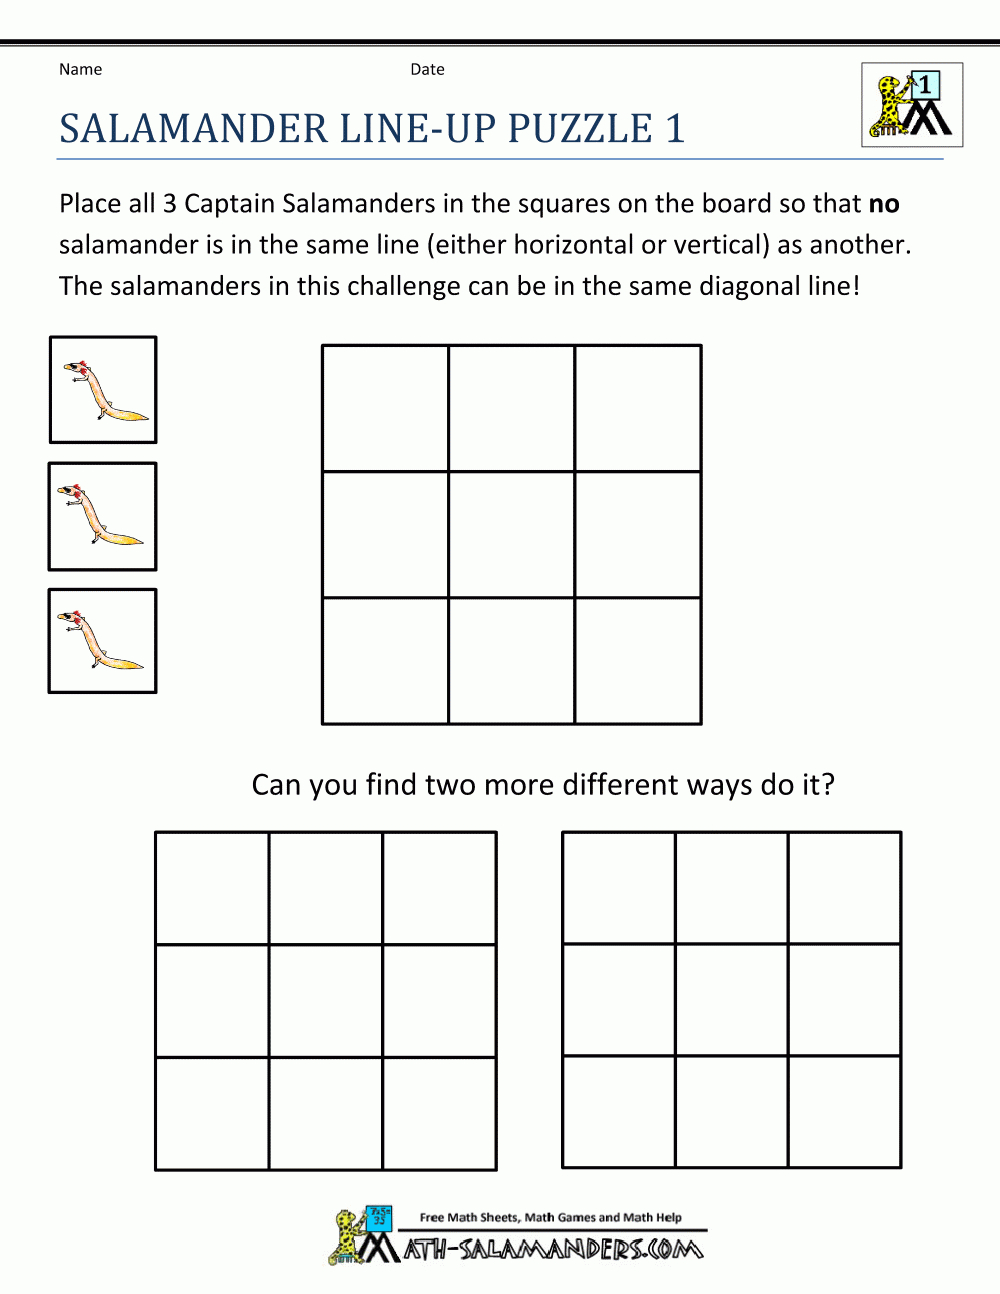 Math Puzzle Worksheets Salamander Line Up Puzzle 1 | Math Games And - X Puzzle Worksheet